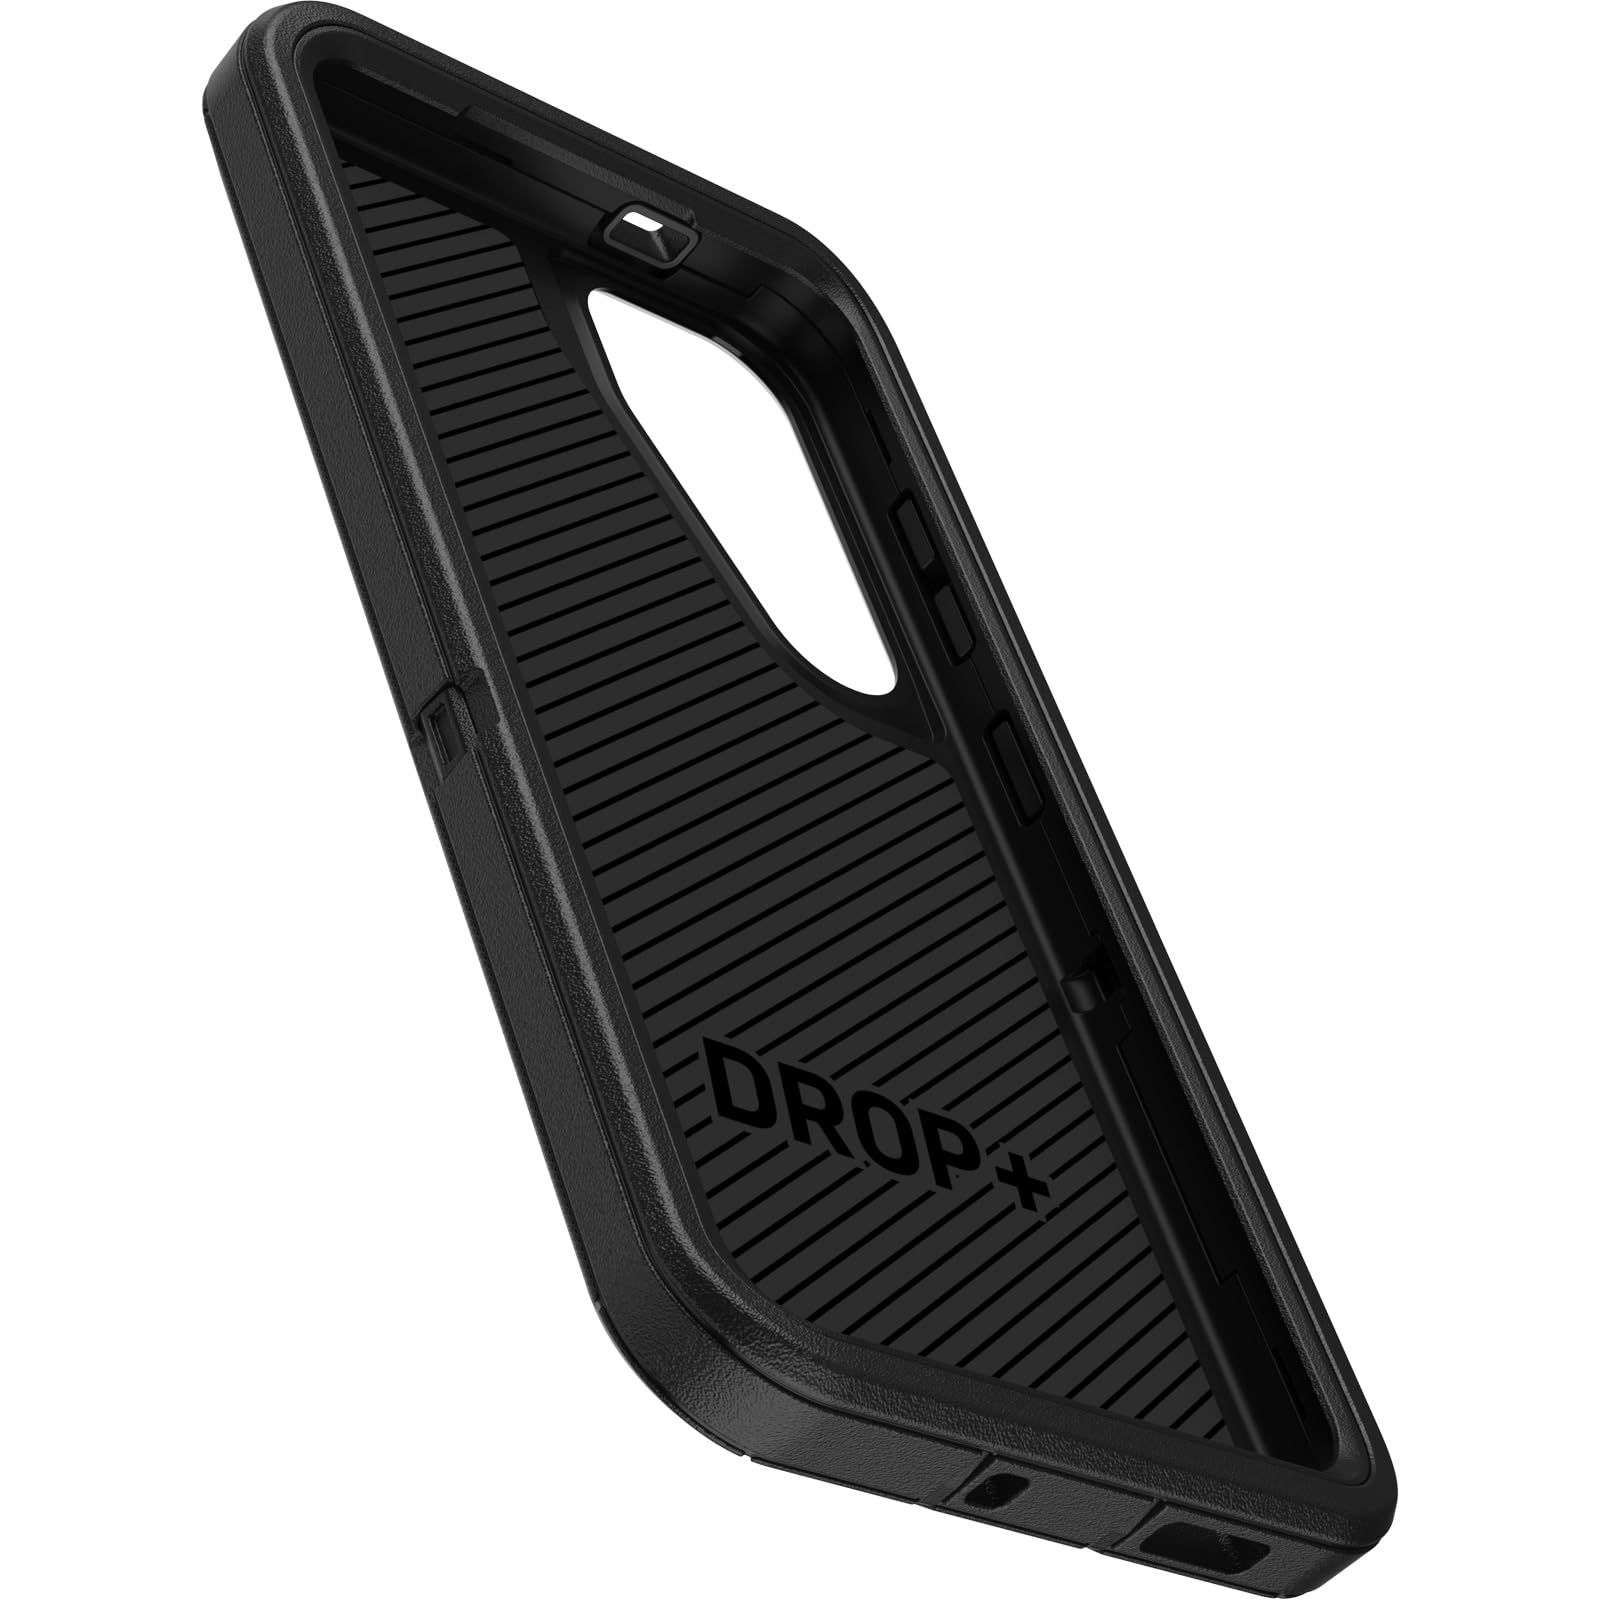 OtterBox Samsung Galaxy S24 Defender Series Case - Black, Rugged & Durable, with Port Protection, Includes Holster Clip Kickstand